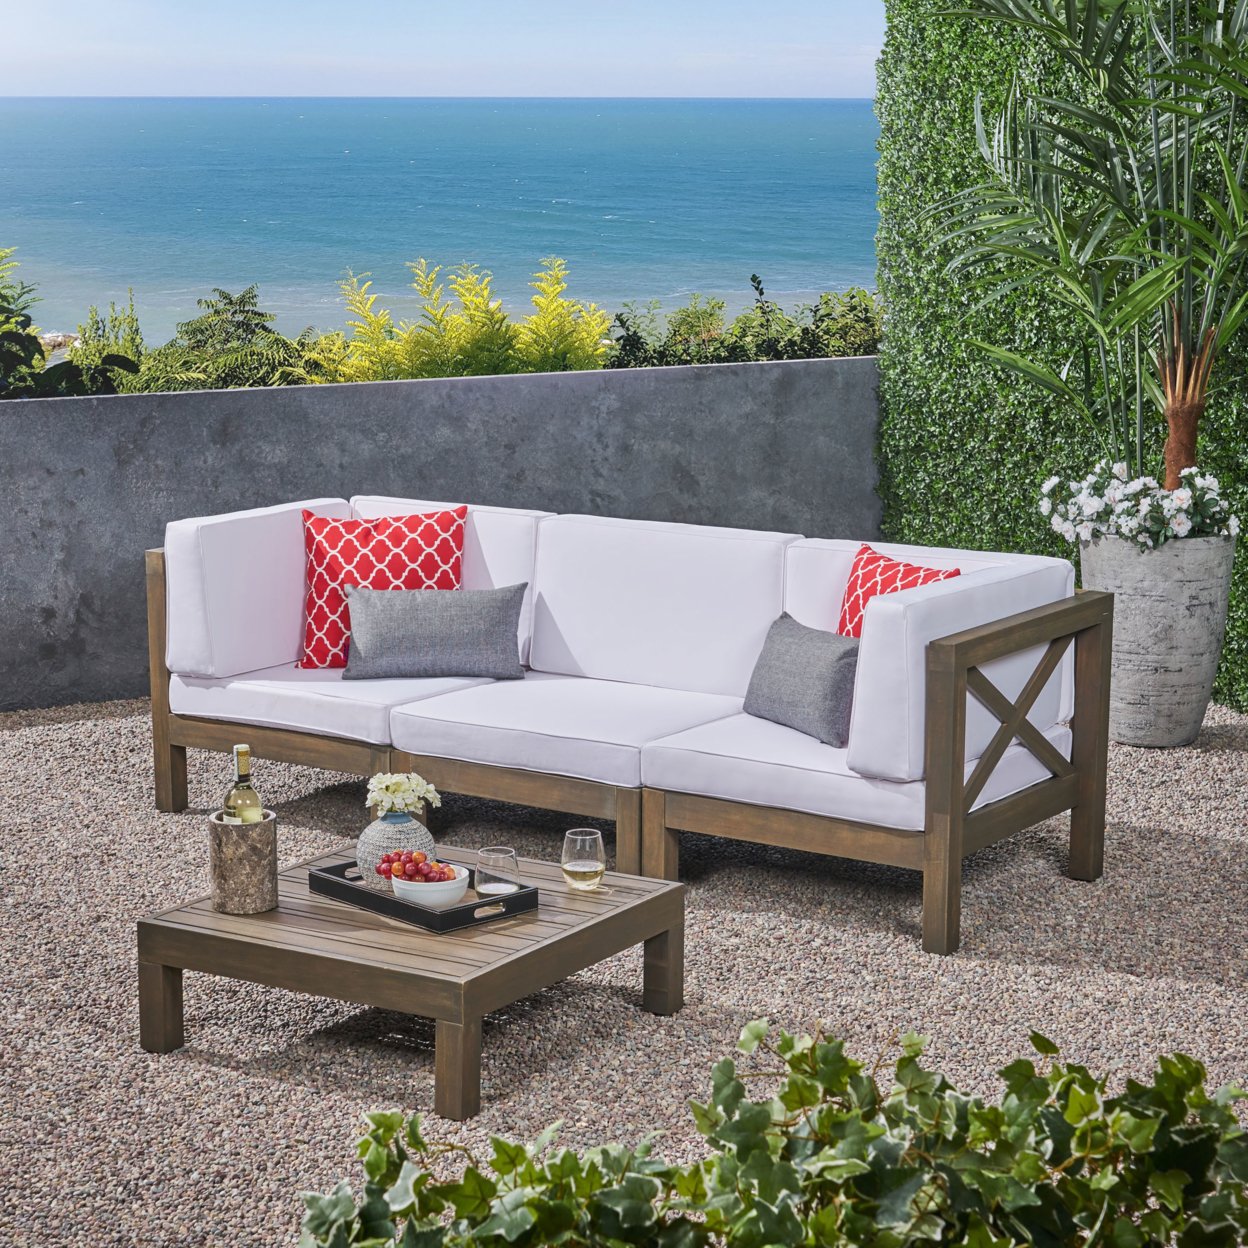 Great Deal Furniture Keith Outdoor Sectional Sofa Set With Coffee Table 3-Seater Acacia Wood Water-Resistant Cushions - Dark Gray